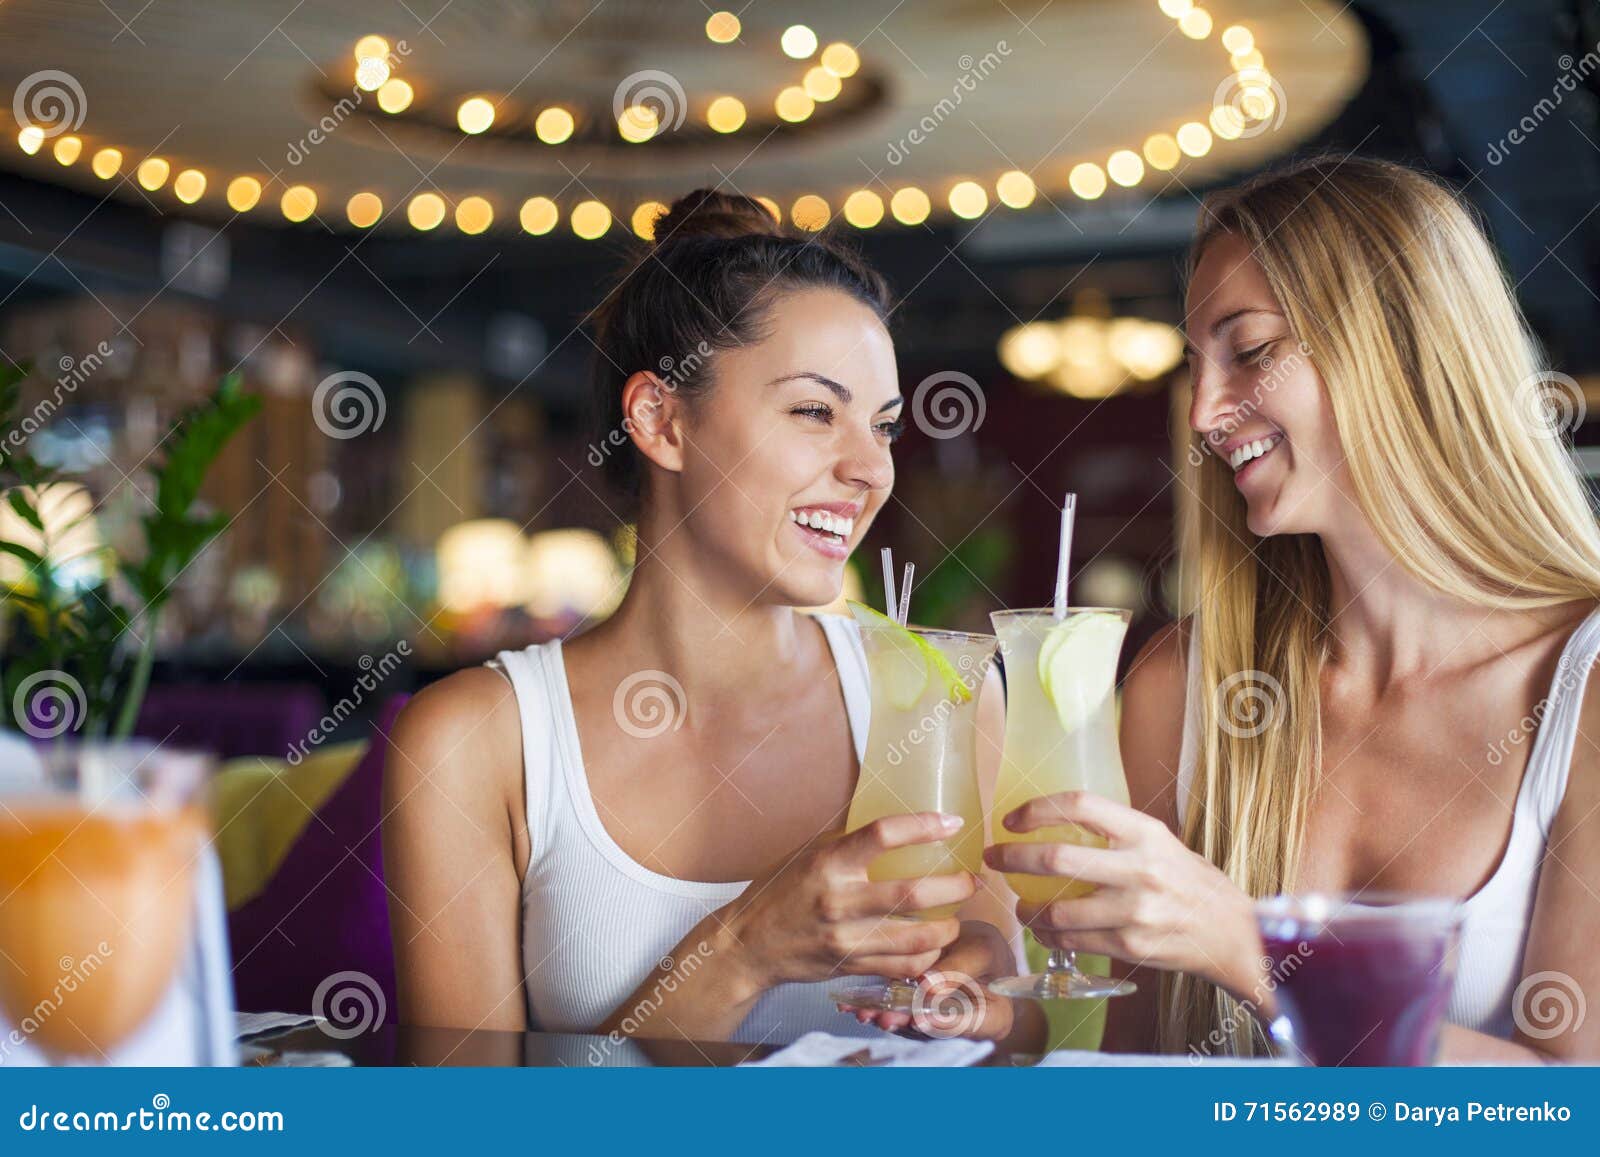 Two Women Having Fun In A Bar Drinking Cocktails Stock Image Image Of Restaurant Outgoing